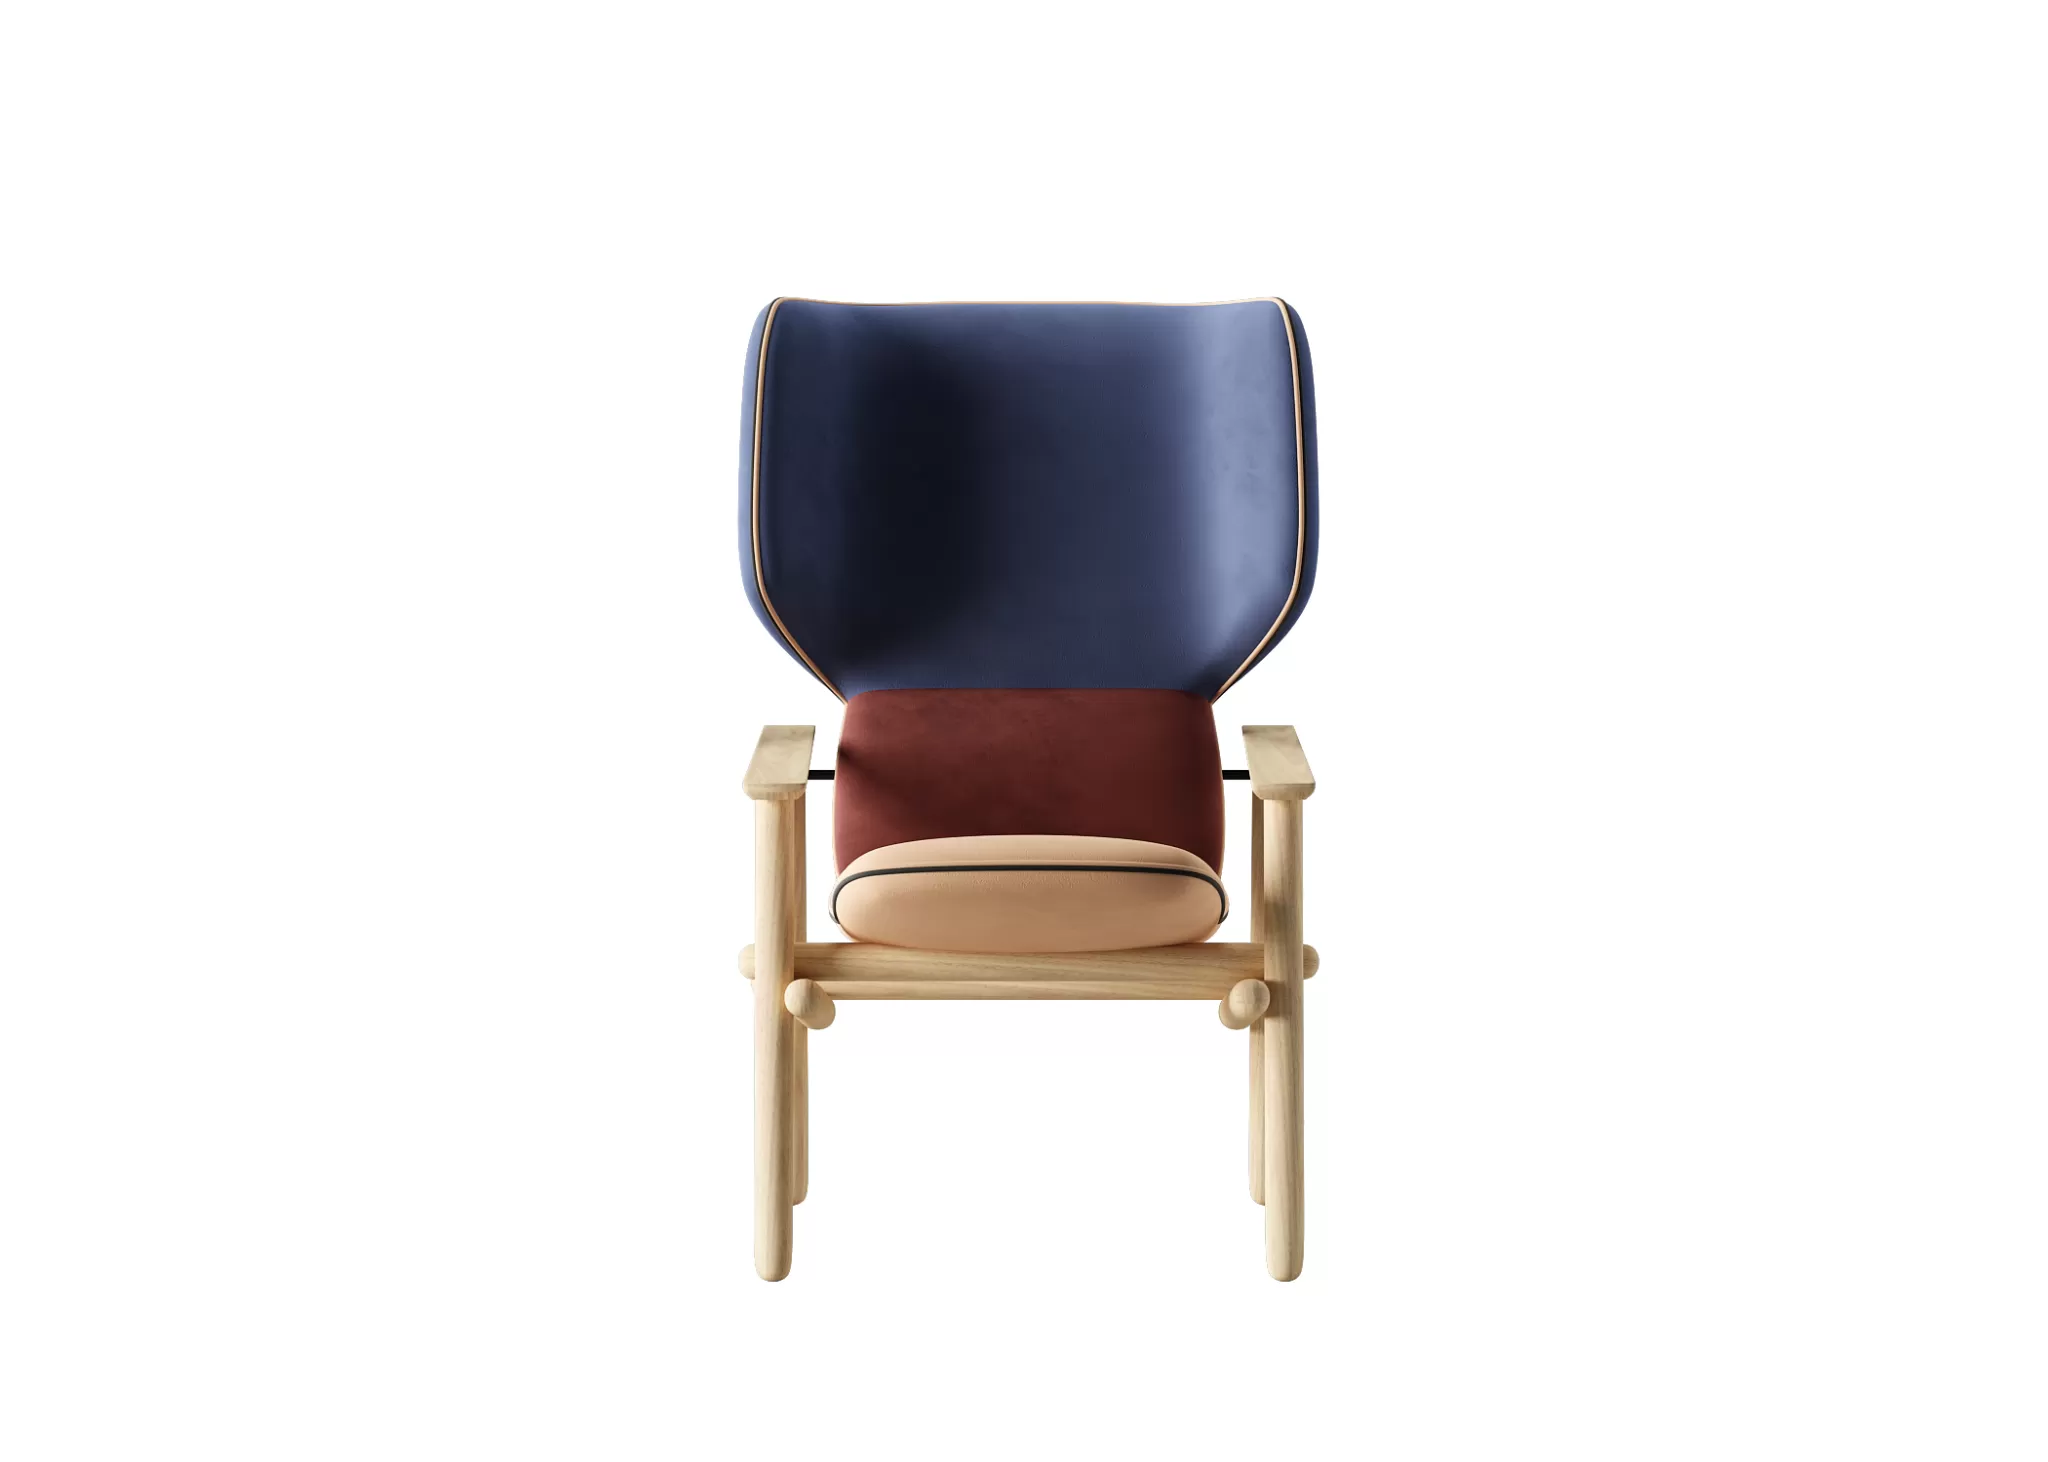 FURNITURE 3D MODELS – CHAIRS – 0105